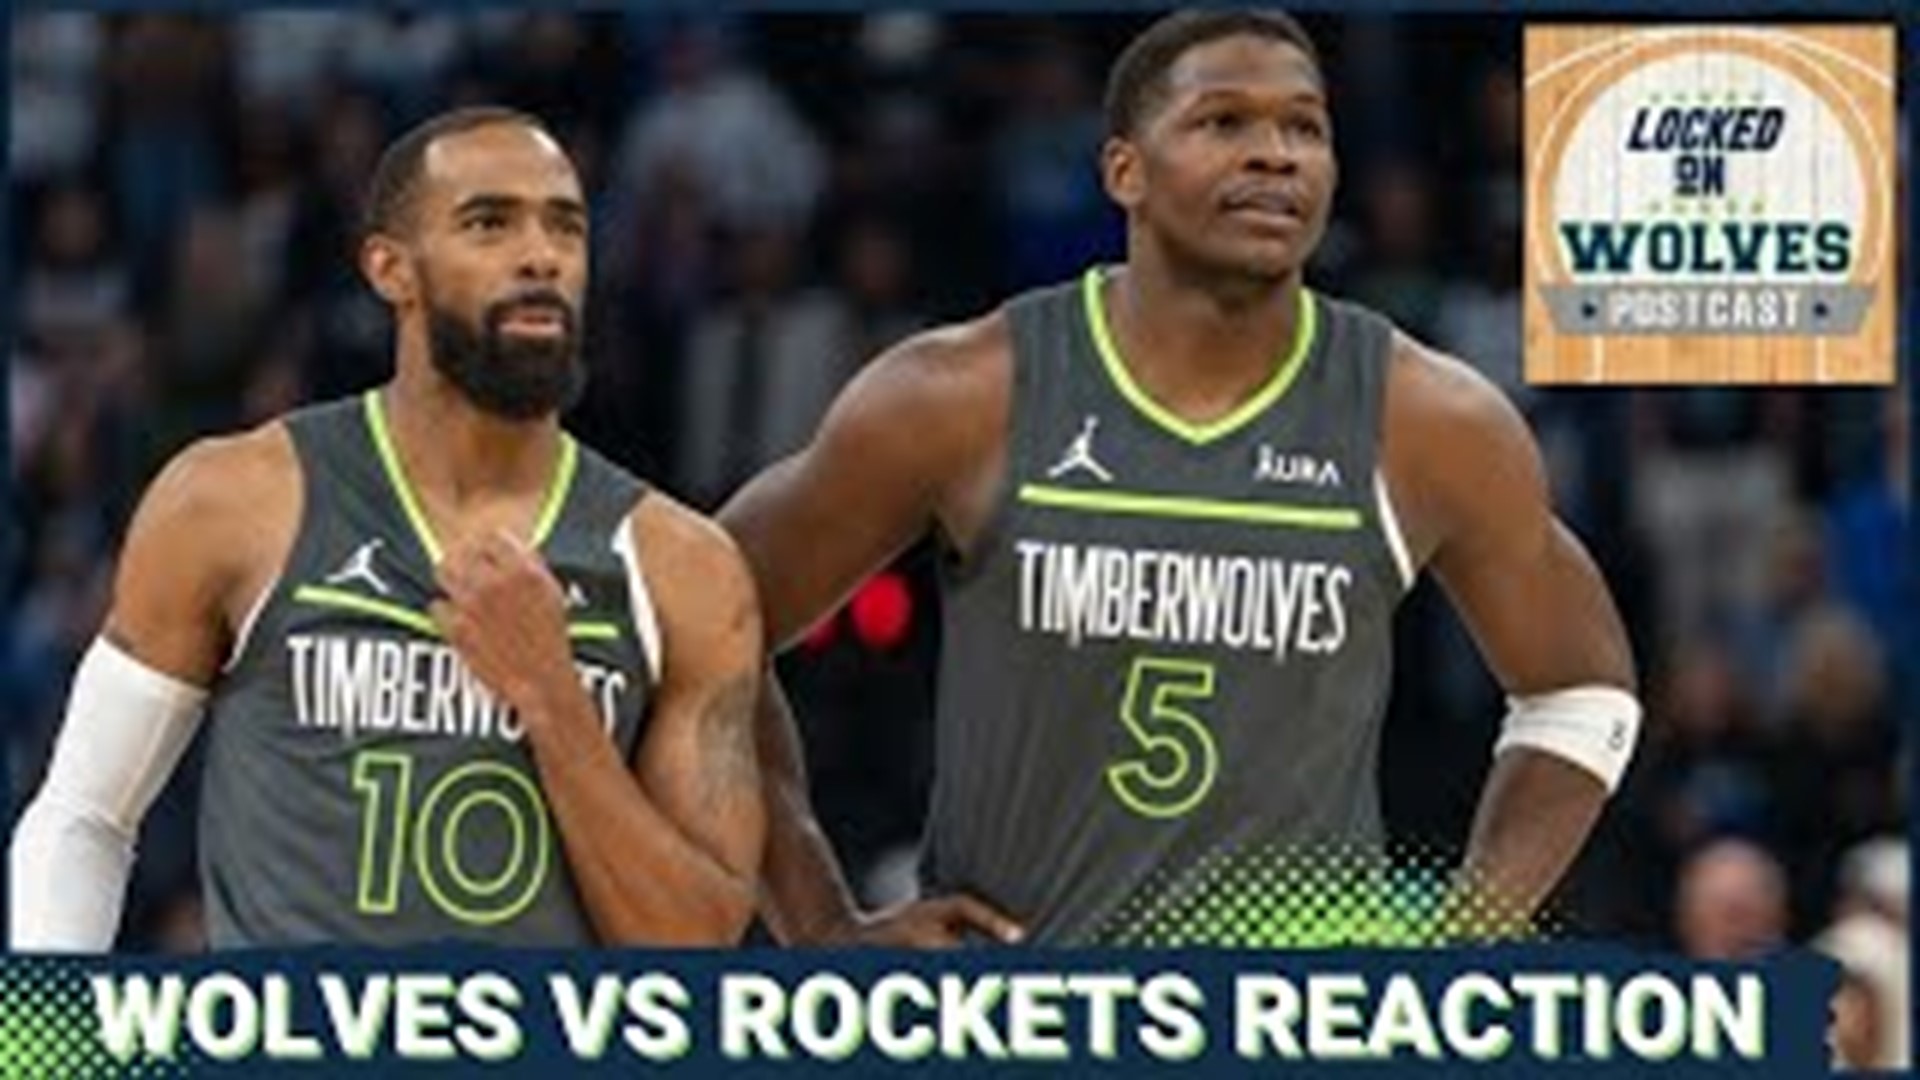 The Minnesota Timberwolves take down a red hot Houston Rockets team 111-106. Join Luke Inman and Jack Borman for the instant reaction following the game.